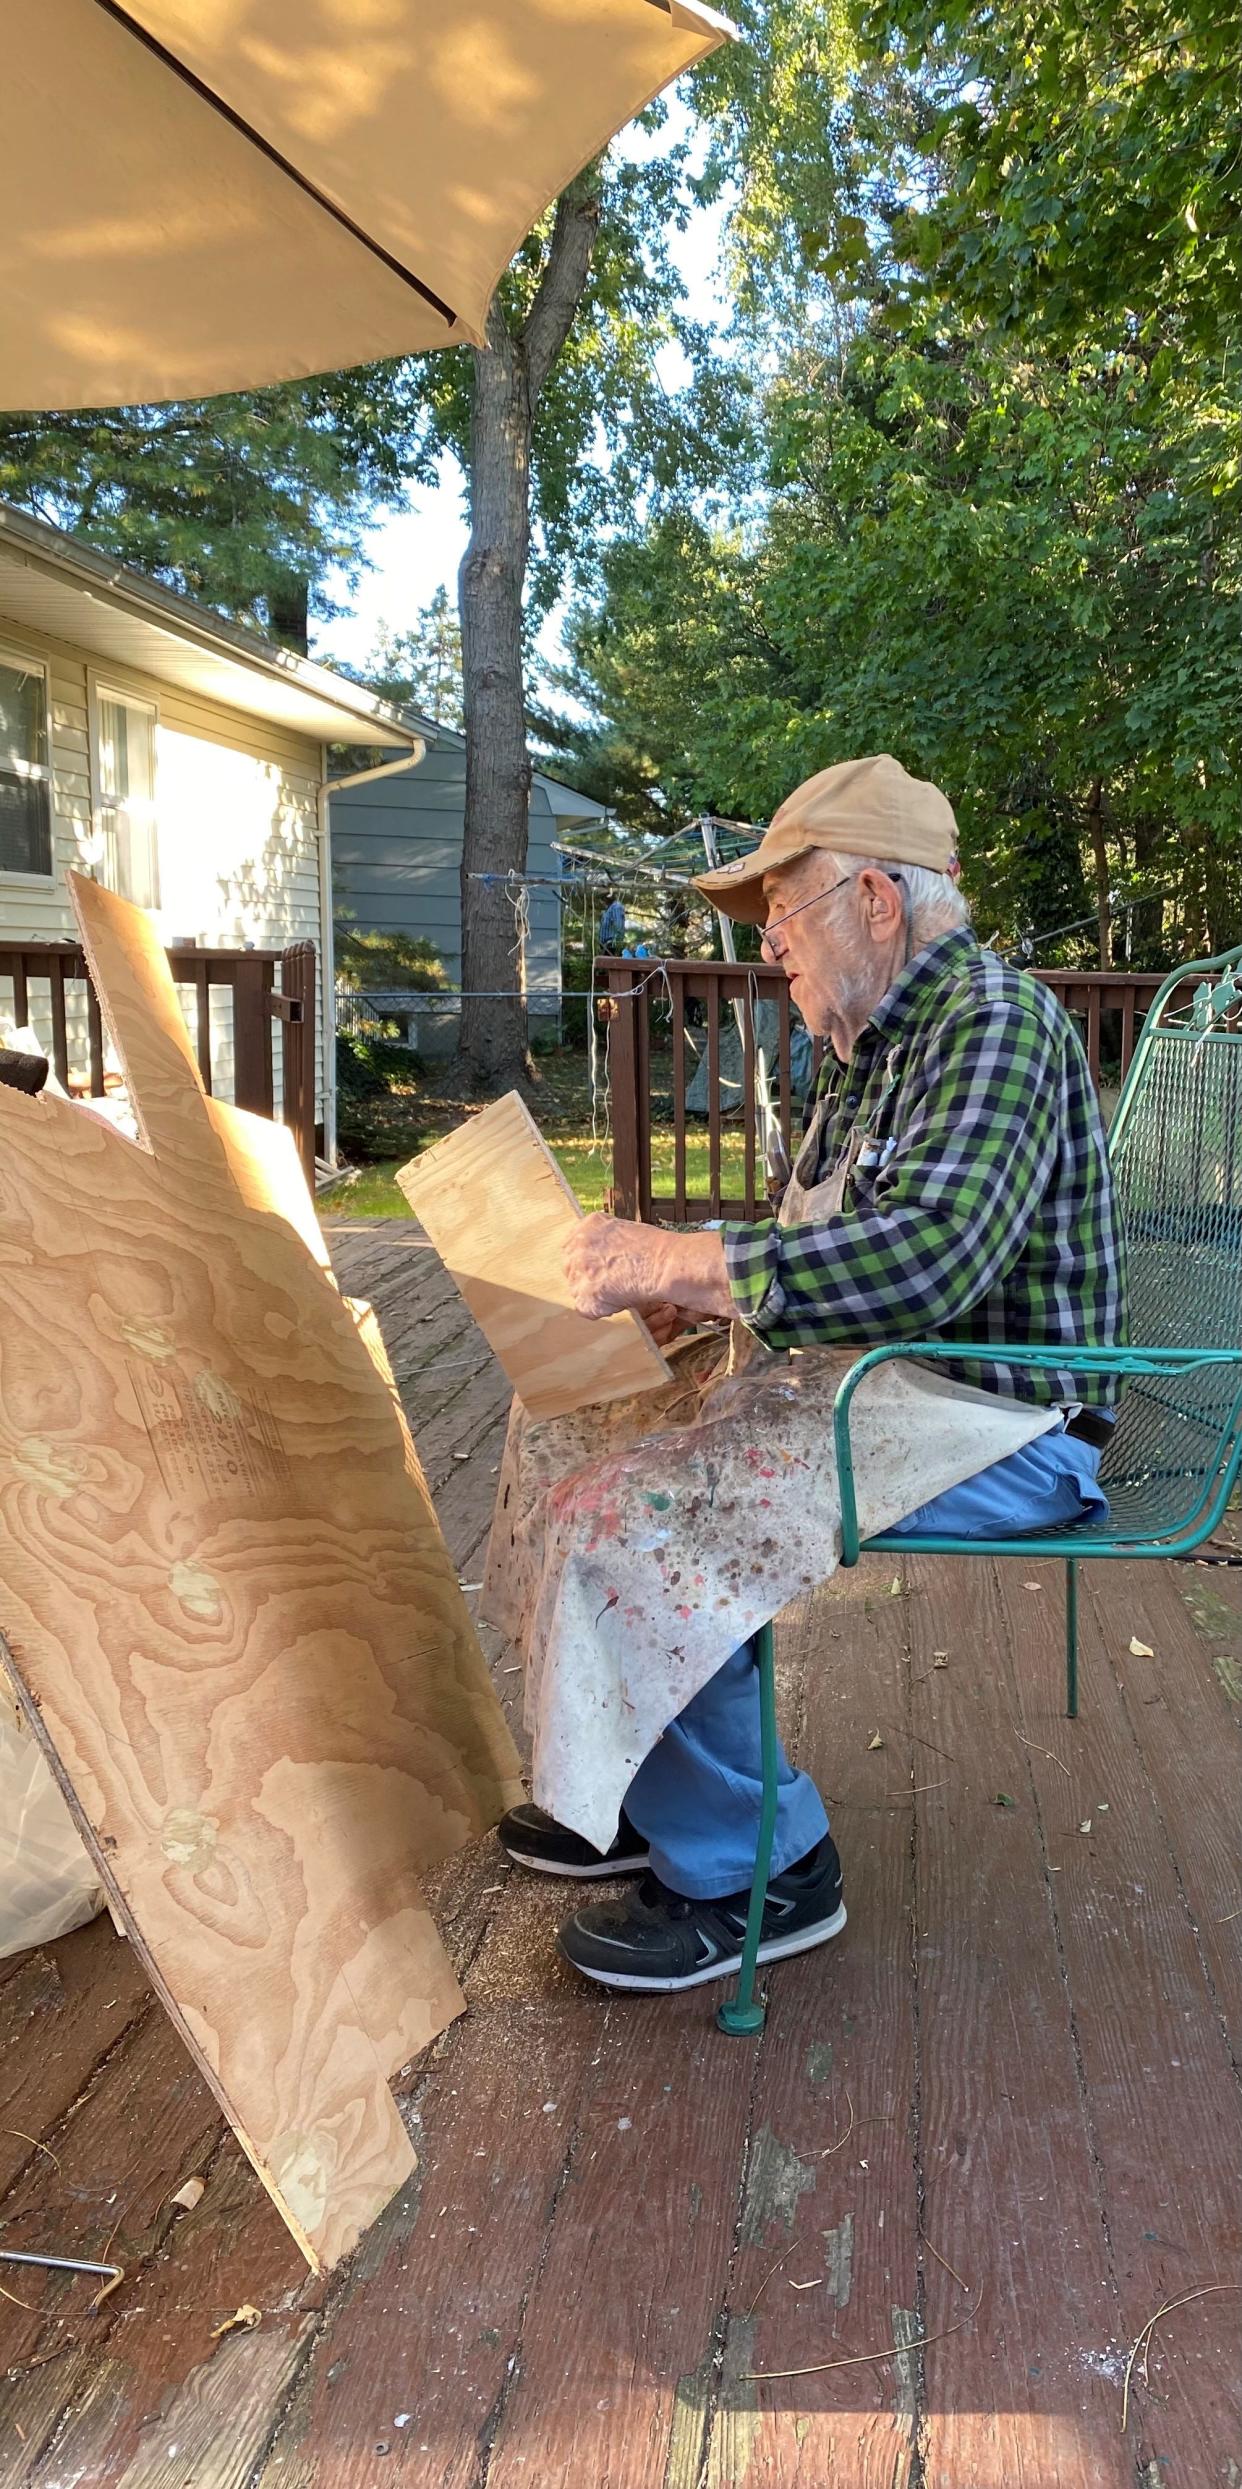 Retired for nearly 30 years, James Sodano of Jamesburg took up woodworking to "keep busy."